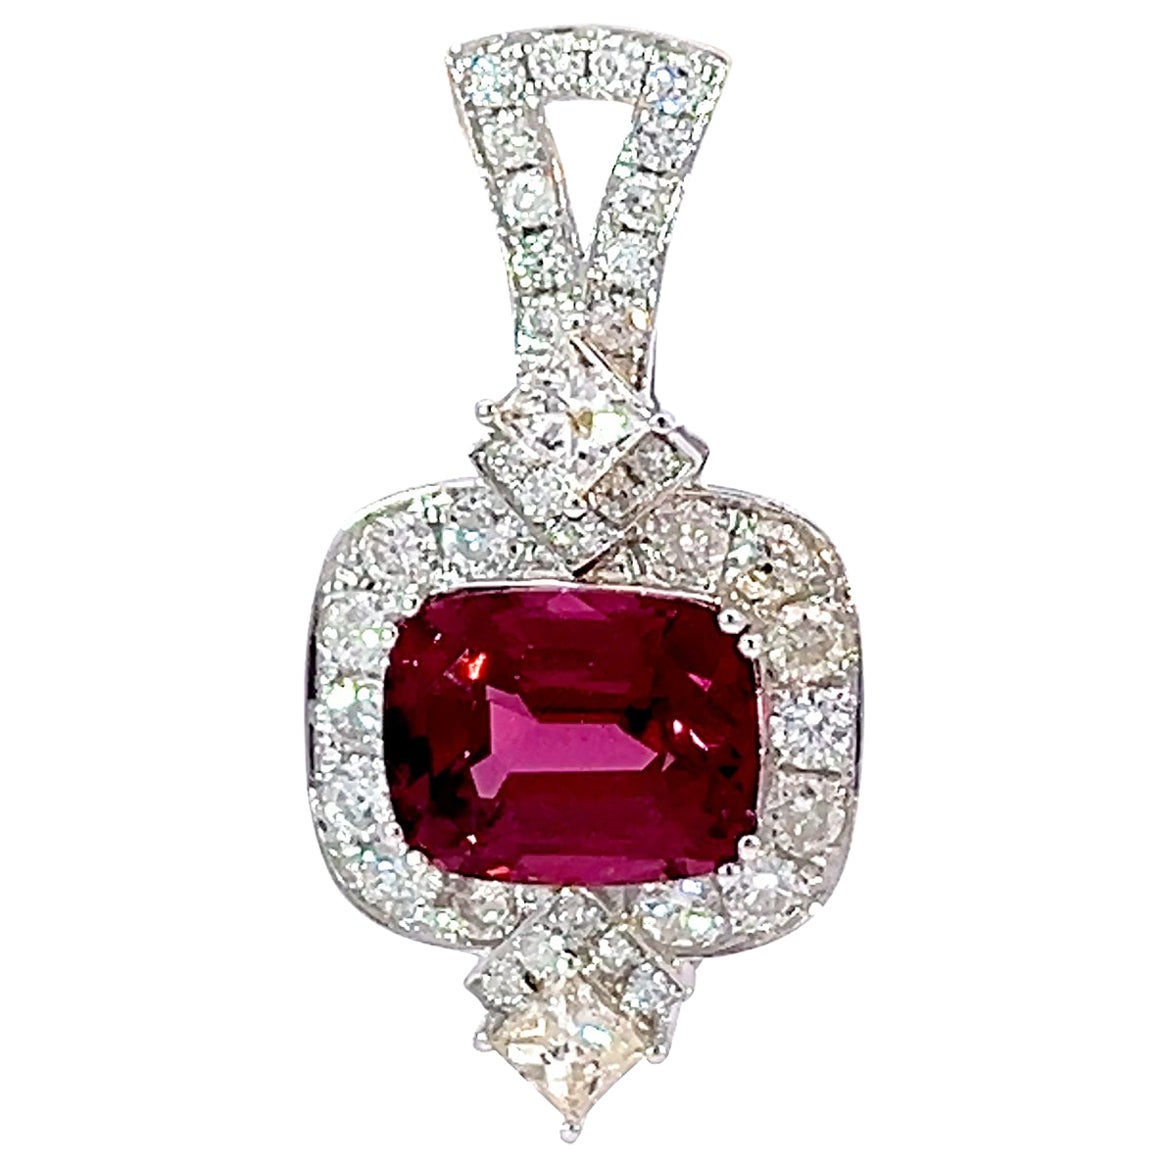 Limited Classic 14k Gold 2.47 ct red burgundy tourmaline .76 ct Diamond Pendant For Sale